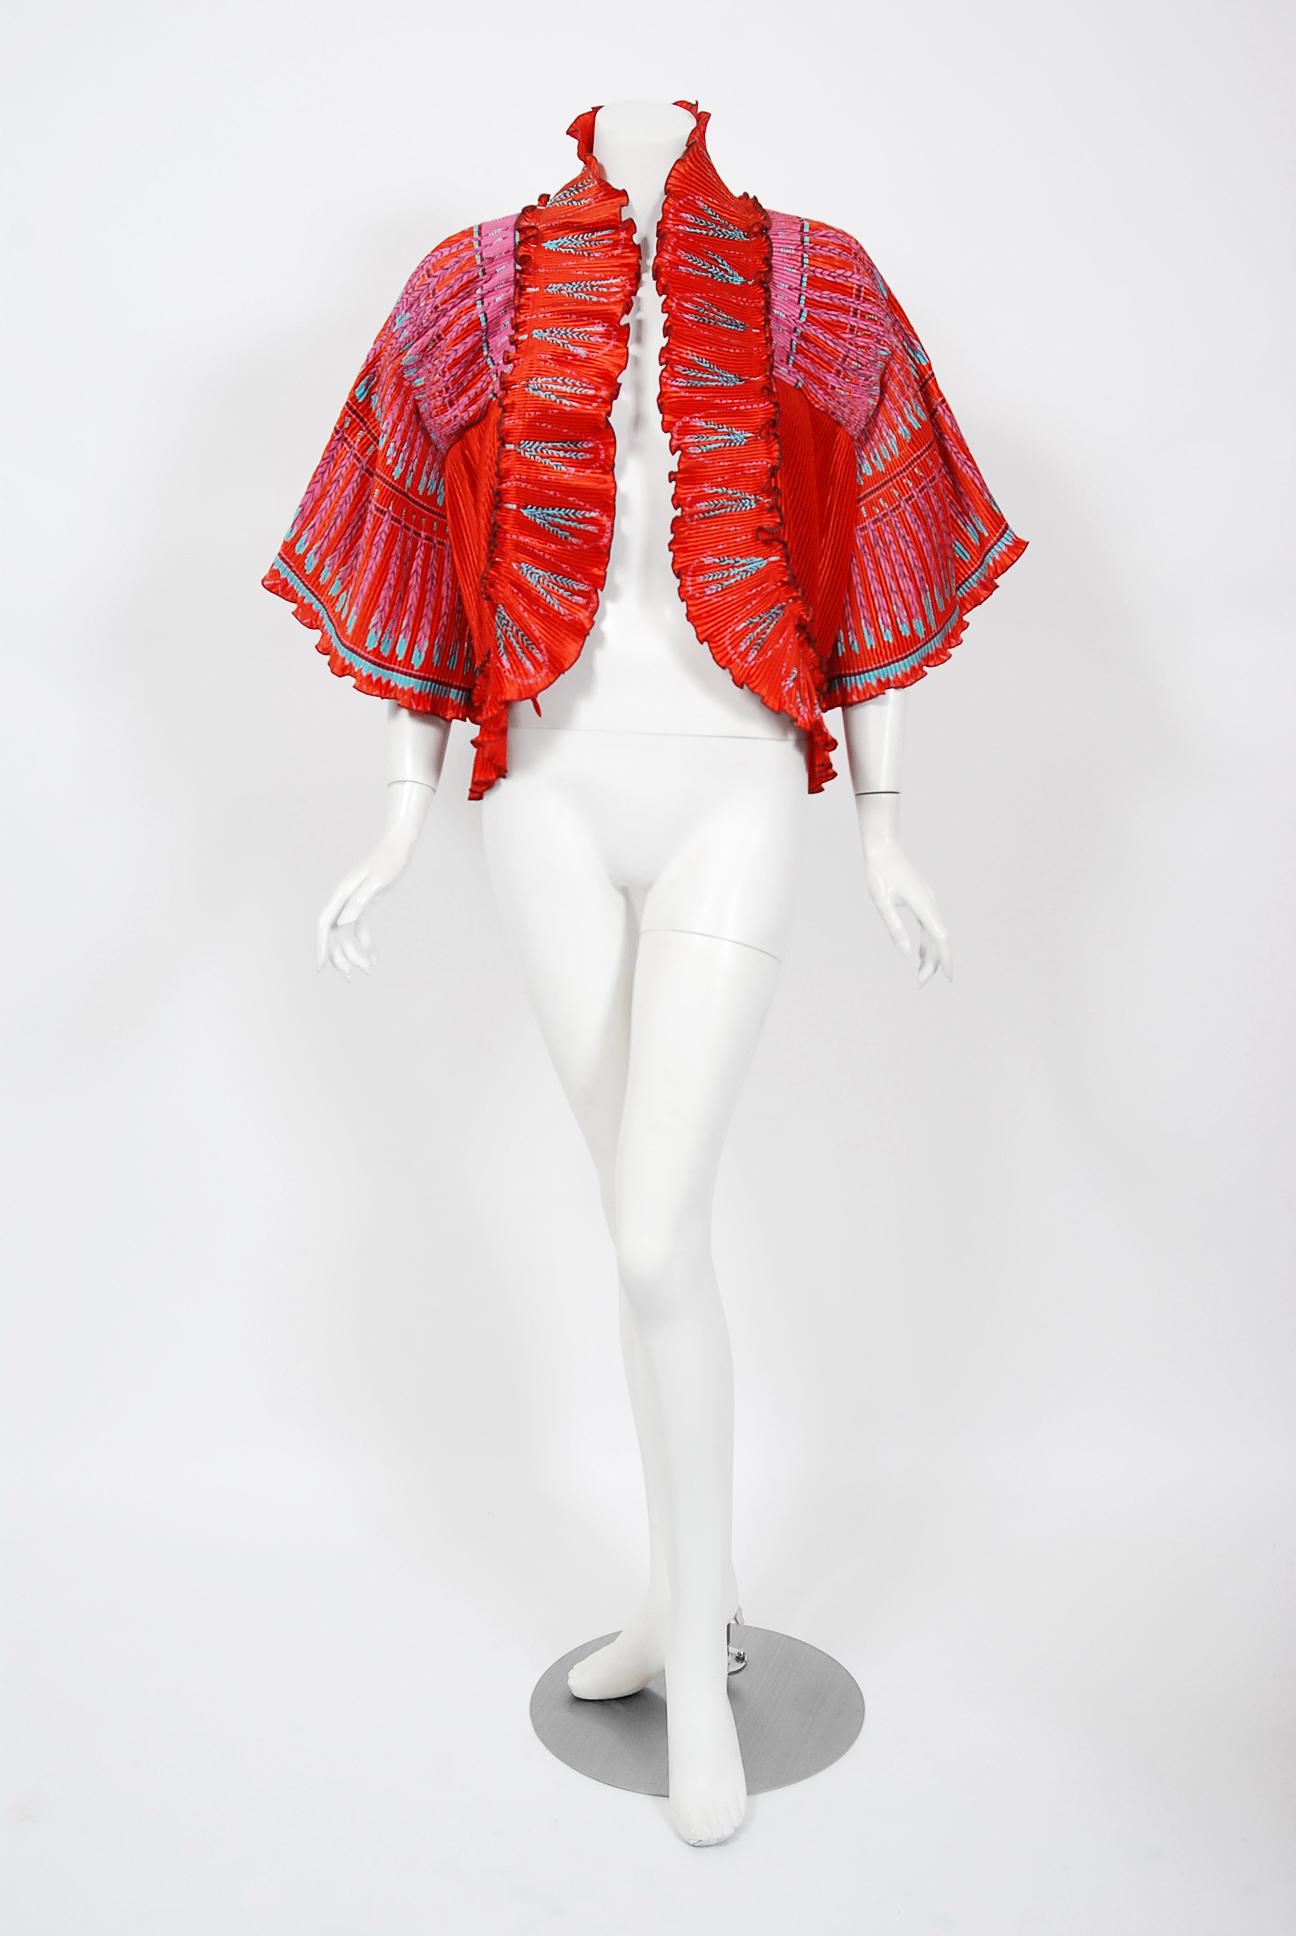 Breathtaking Zandra Rhodes Couture hand-painted jacket dating back to her 1973-74 Ayers Rock collection. During the 1970's, Zandra Rhodes was one of the British designers who put London at the forefront of the international fashion scene. Her